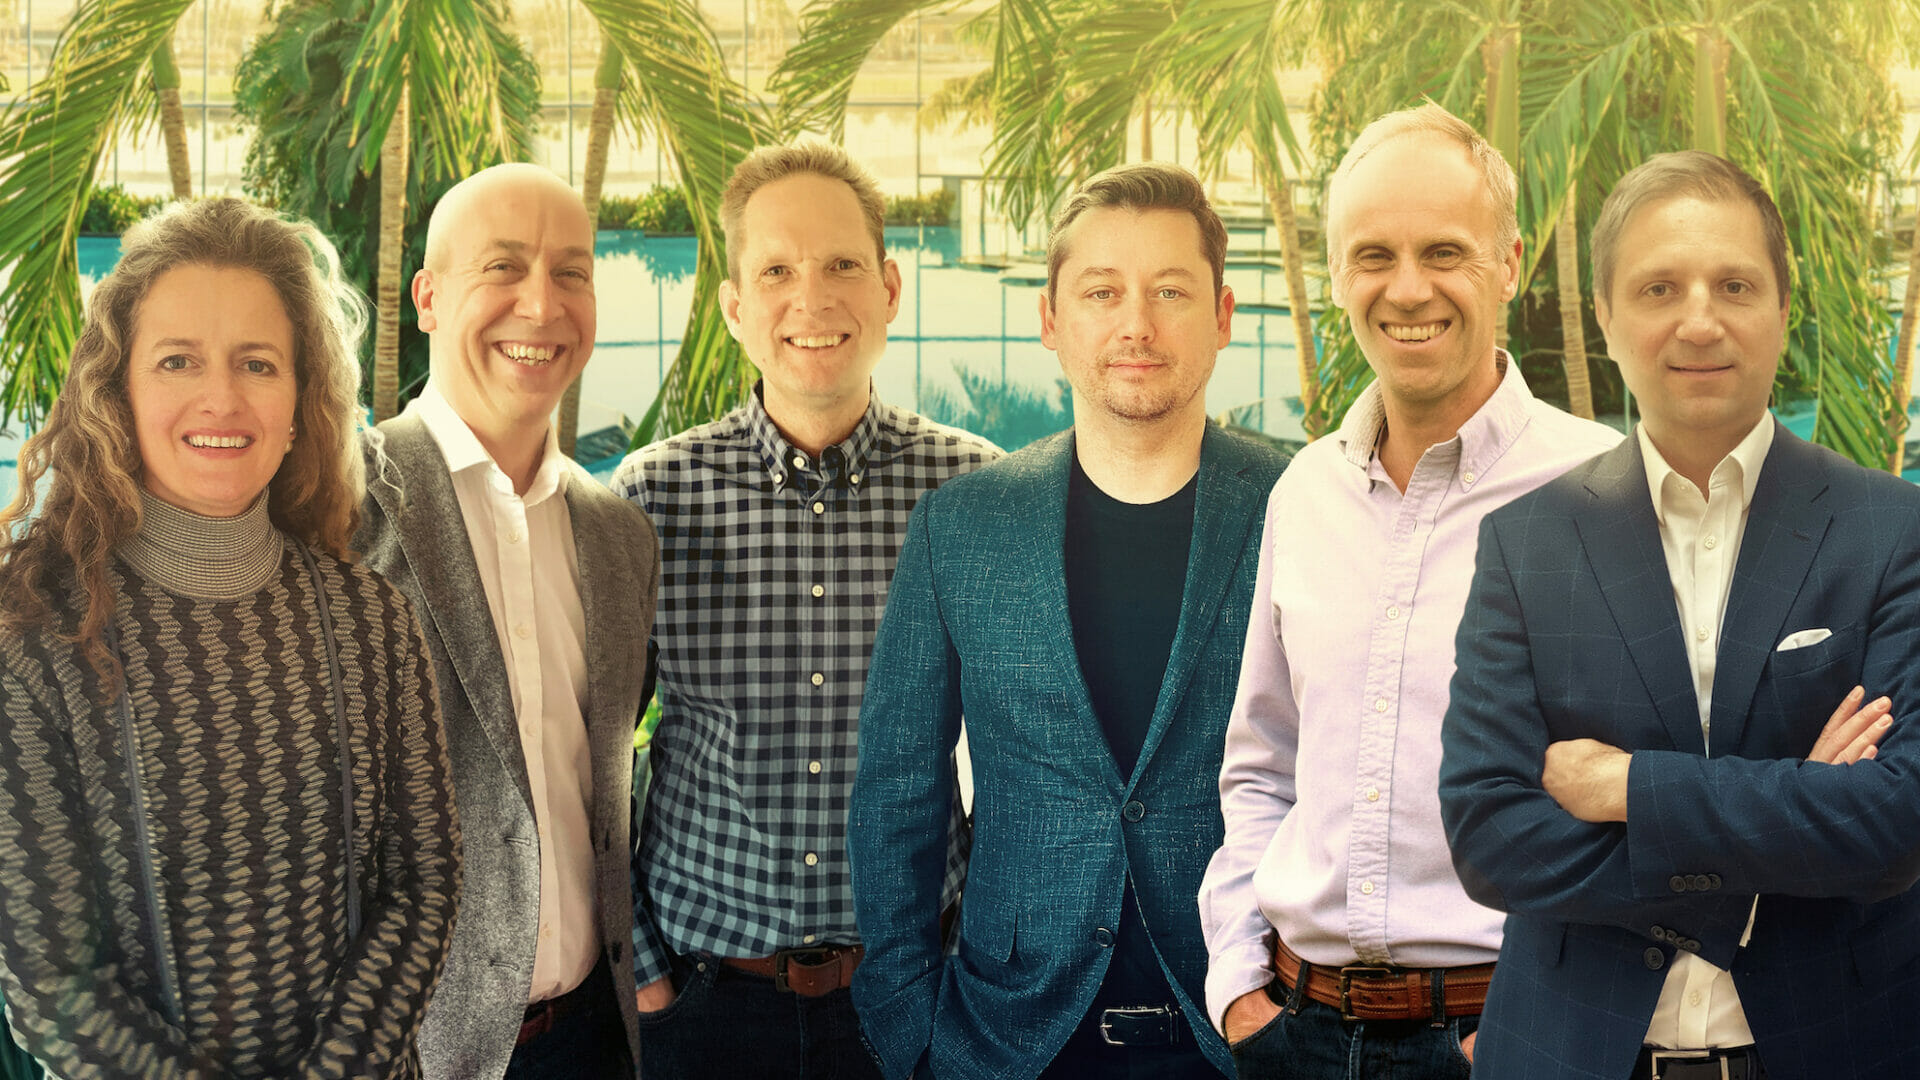 THERME GROUP APPOINTS UK LEADERSHIP TEAM FOR NEXT PHASE OF DEVELOPMENT  @ThermeGroup